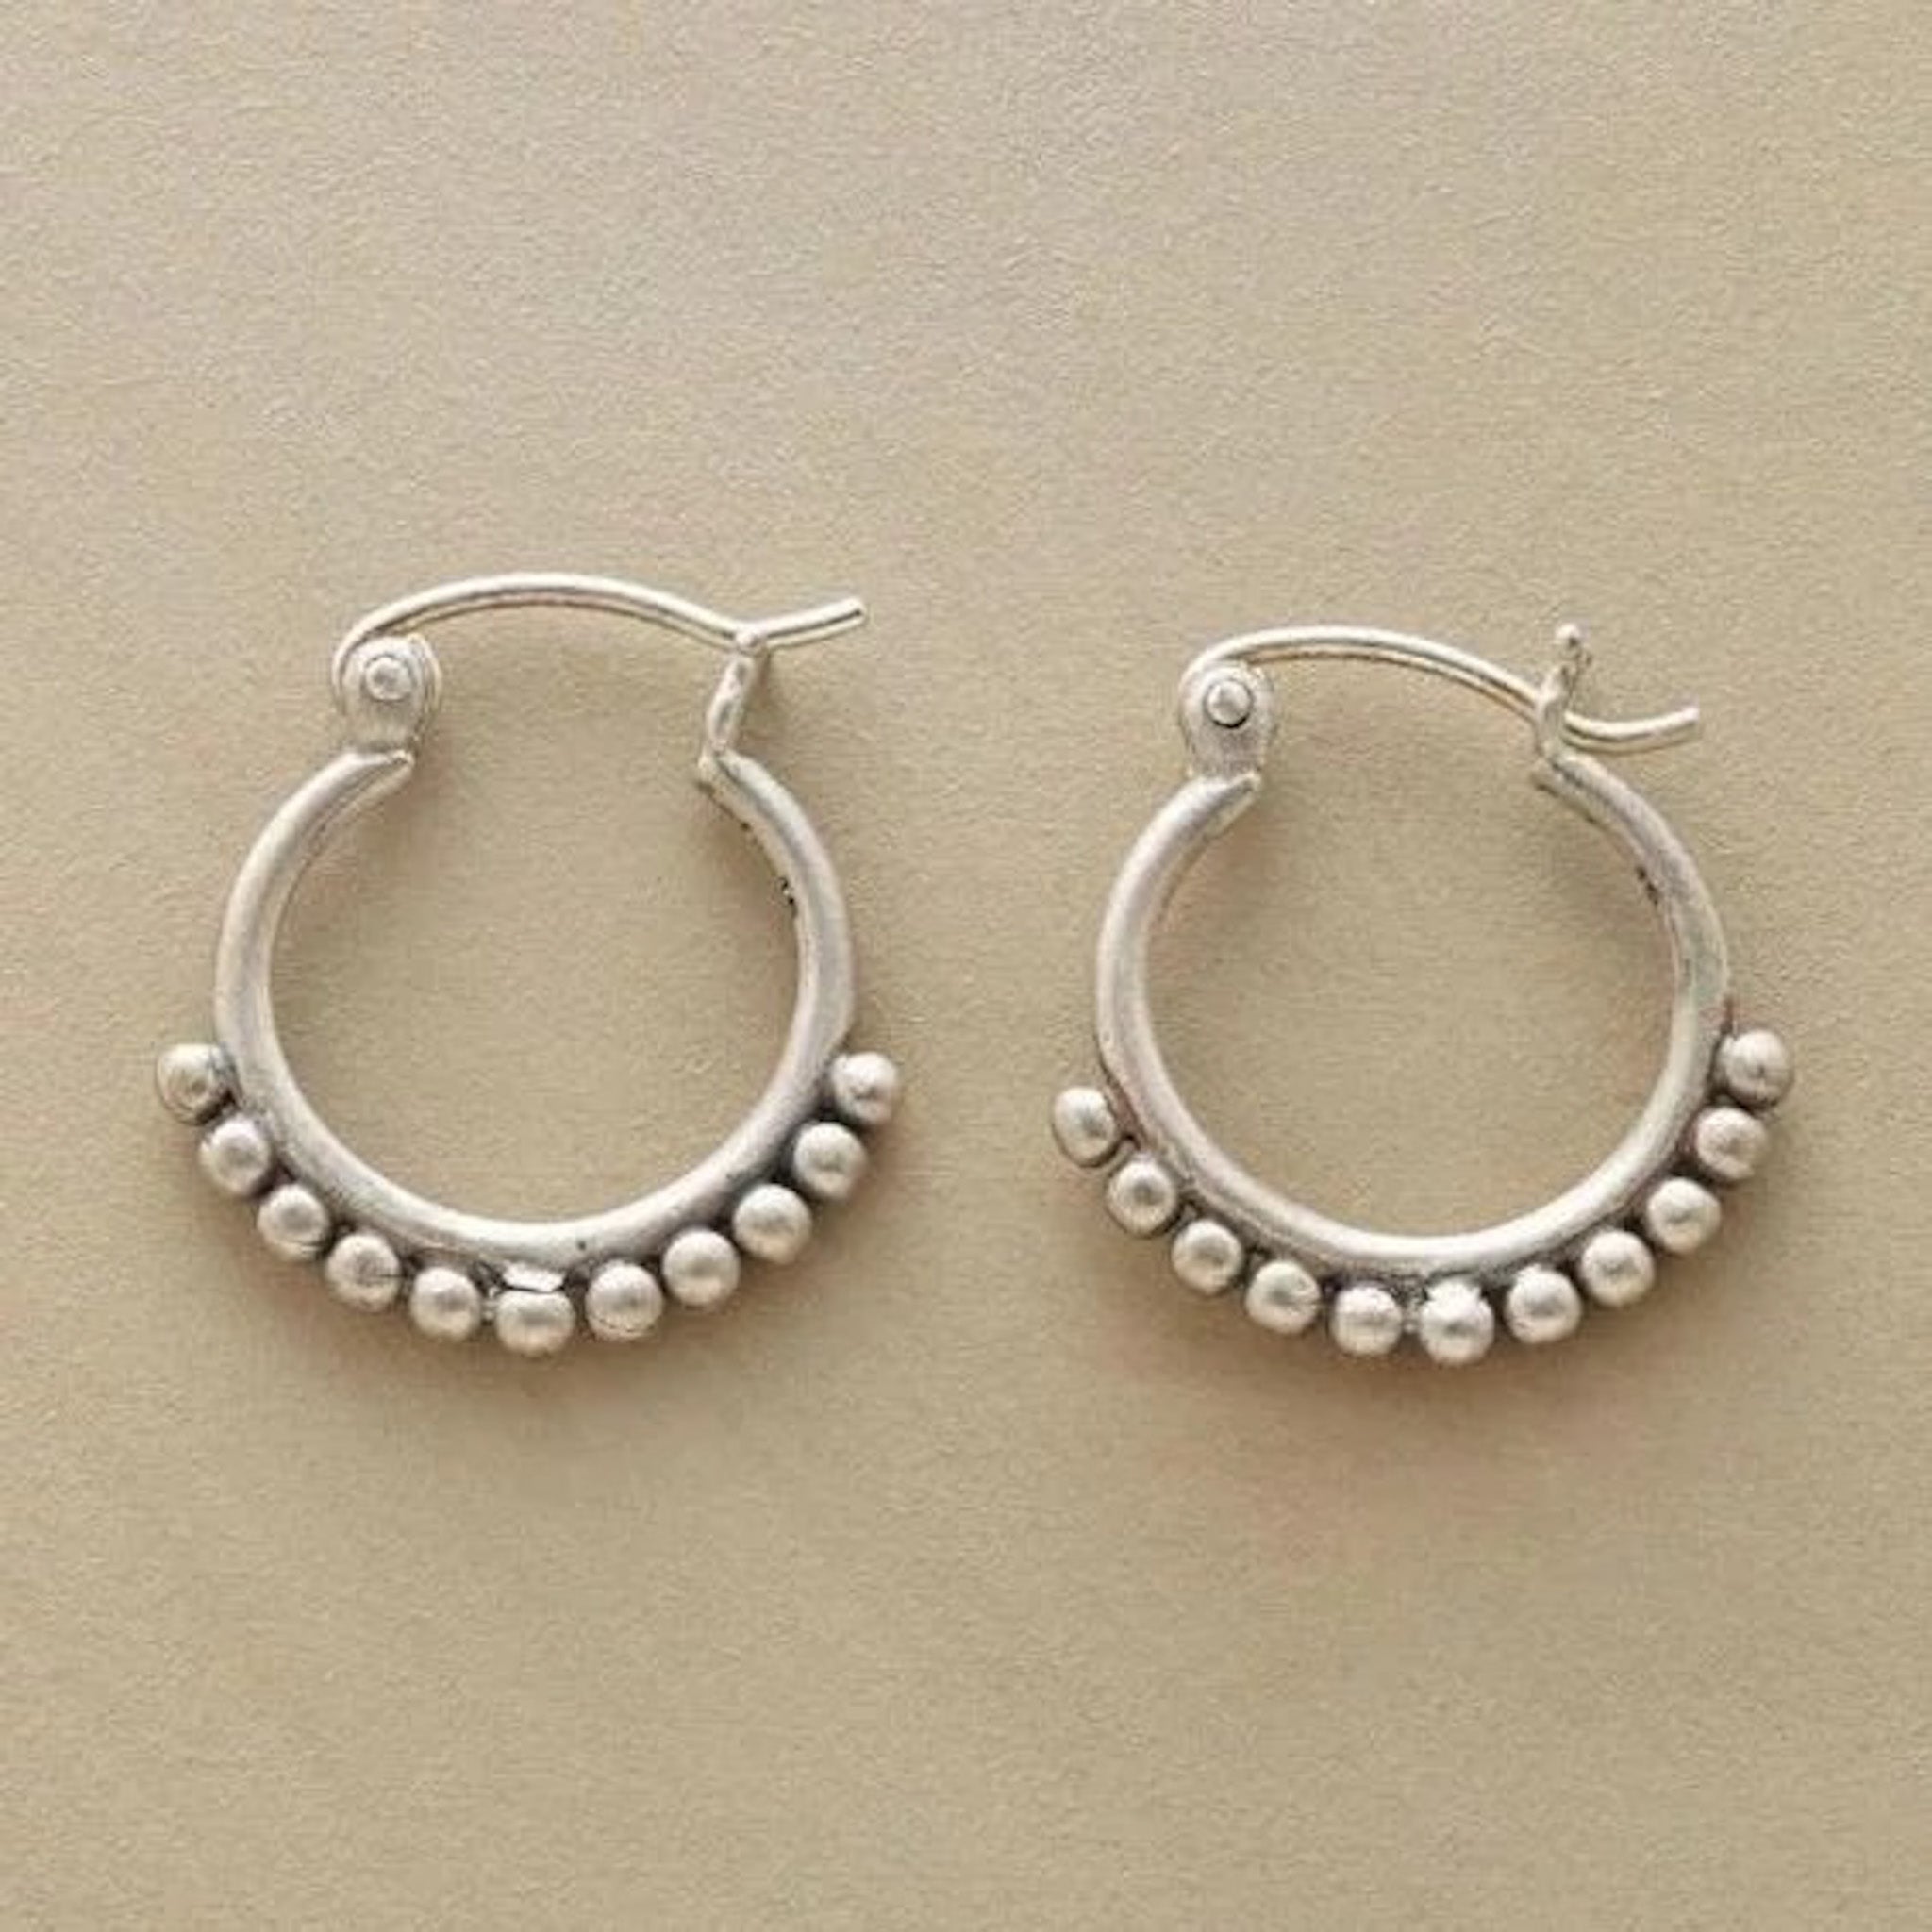 BNWT Antique Silver Minimalist Small Ball Embellished Round Hoop Earrings